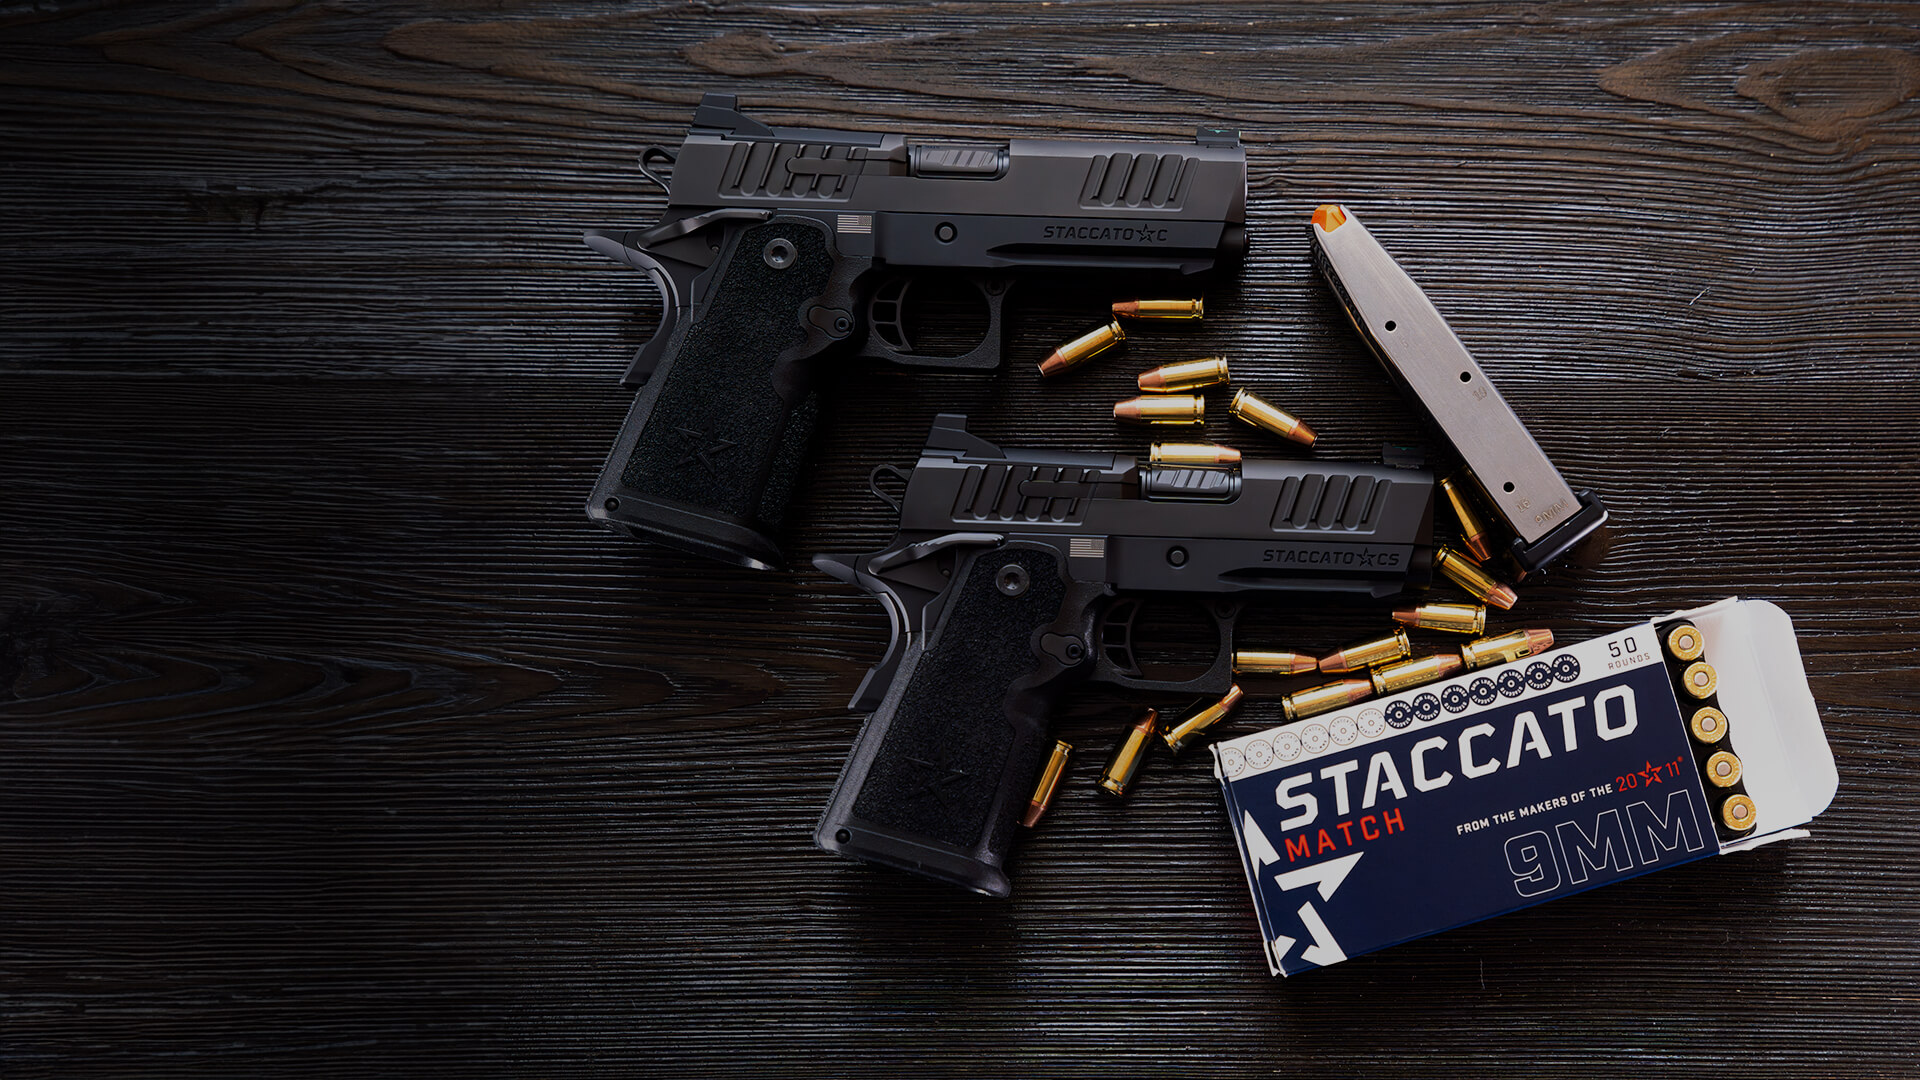 Staccato 2011 Handguns, Pistols, Built Staccato 2011 - & Accessories. Heroes. For